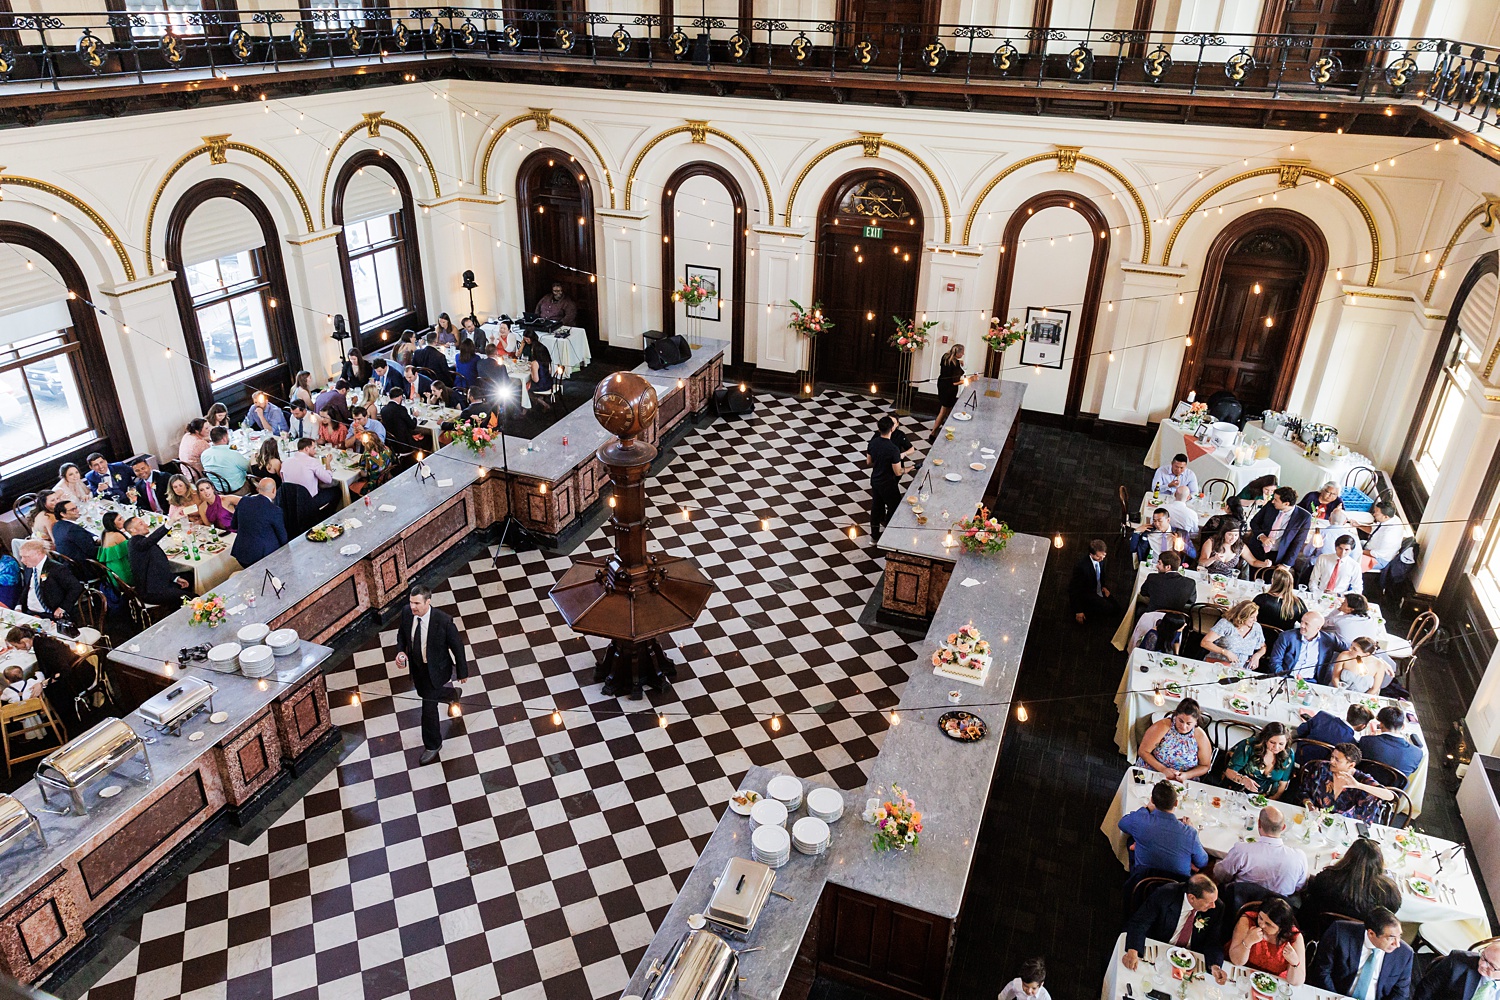 The US Customs House in Portland Maine is the site for the wedding reception